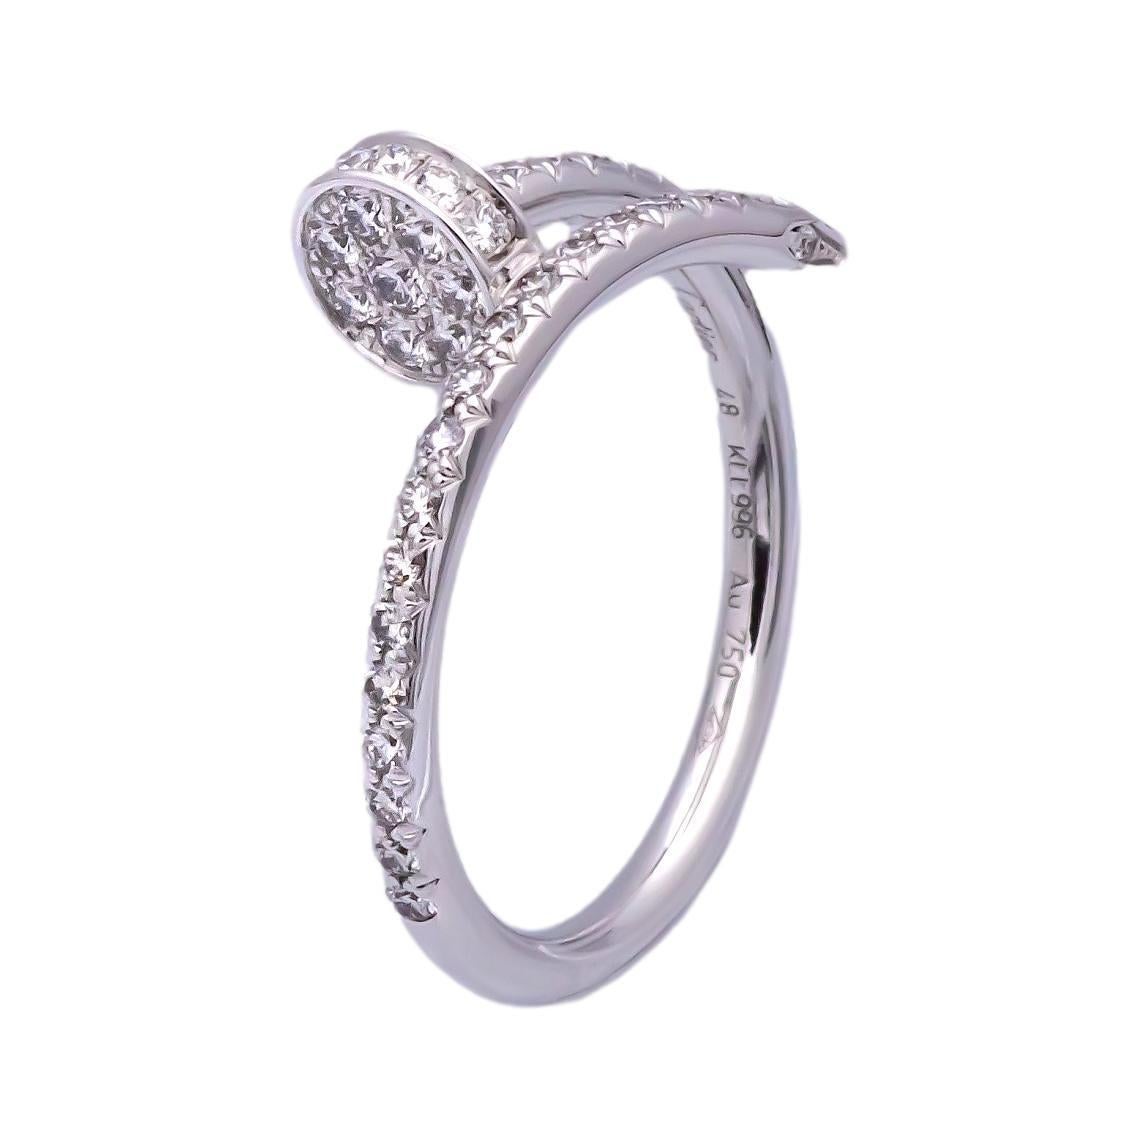 Cartier ring from the Juste un Clou collection finely crafted in 18 karat white gold encrusted with 53 pave set round brilliant cut diamonds weighing a total of 0.40 carats total weight in a wrap around nail design. The ring fits finger size 48 (